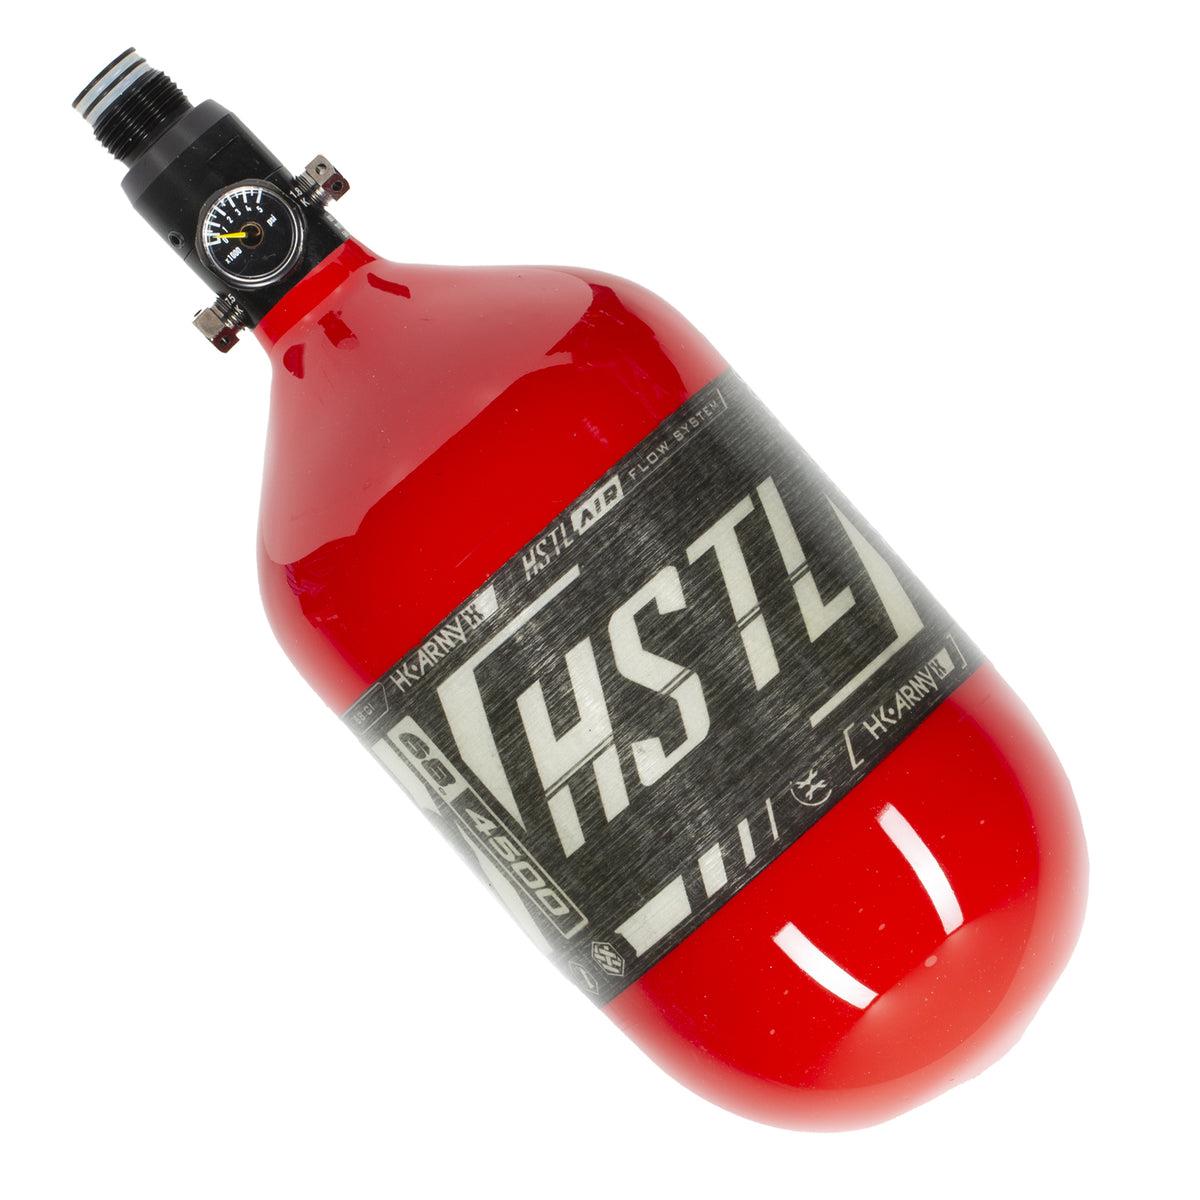 HK Army HSTL 68/4500 Carbon Fiber HPA Compressed Air Paintball Tank System - Standard Reg - Red HK Army